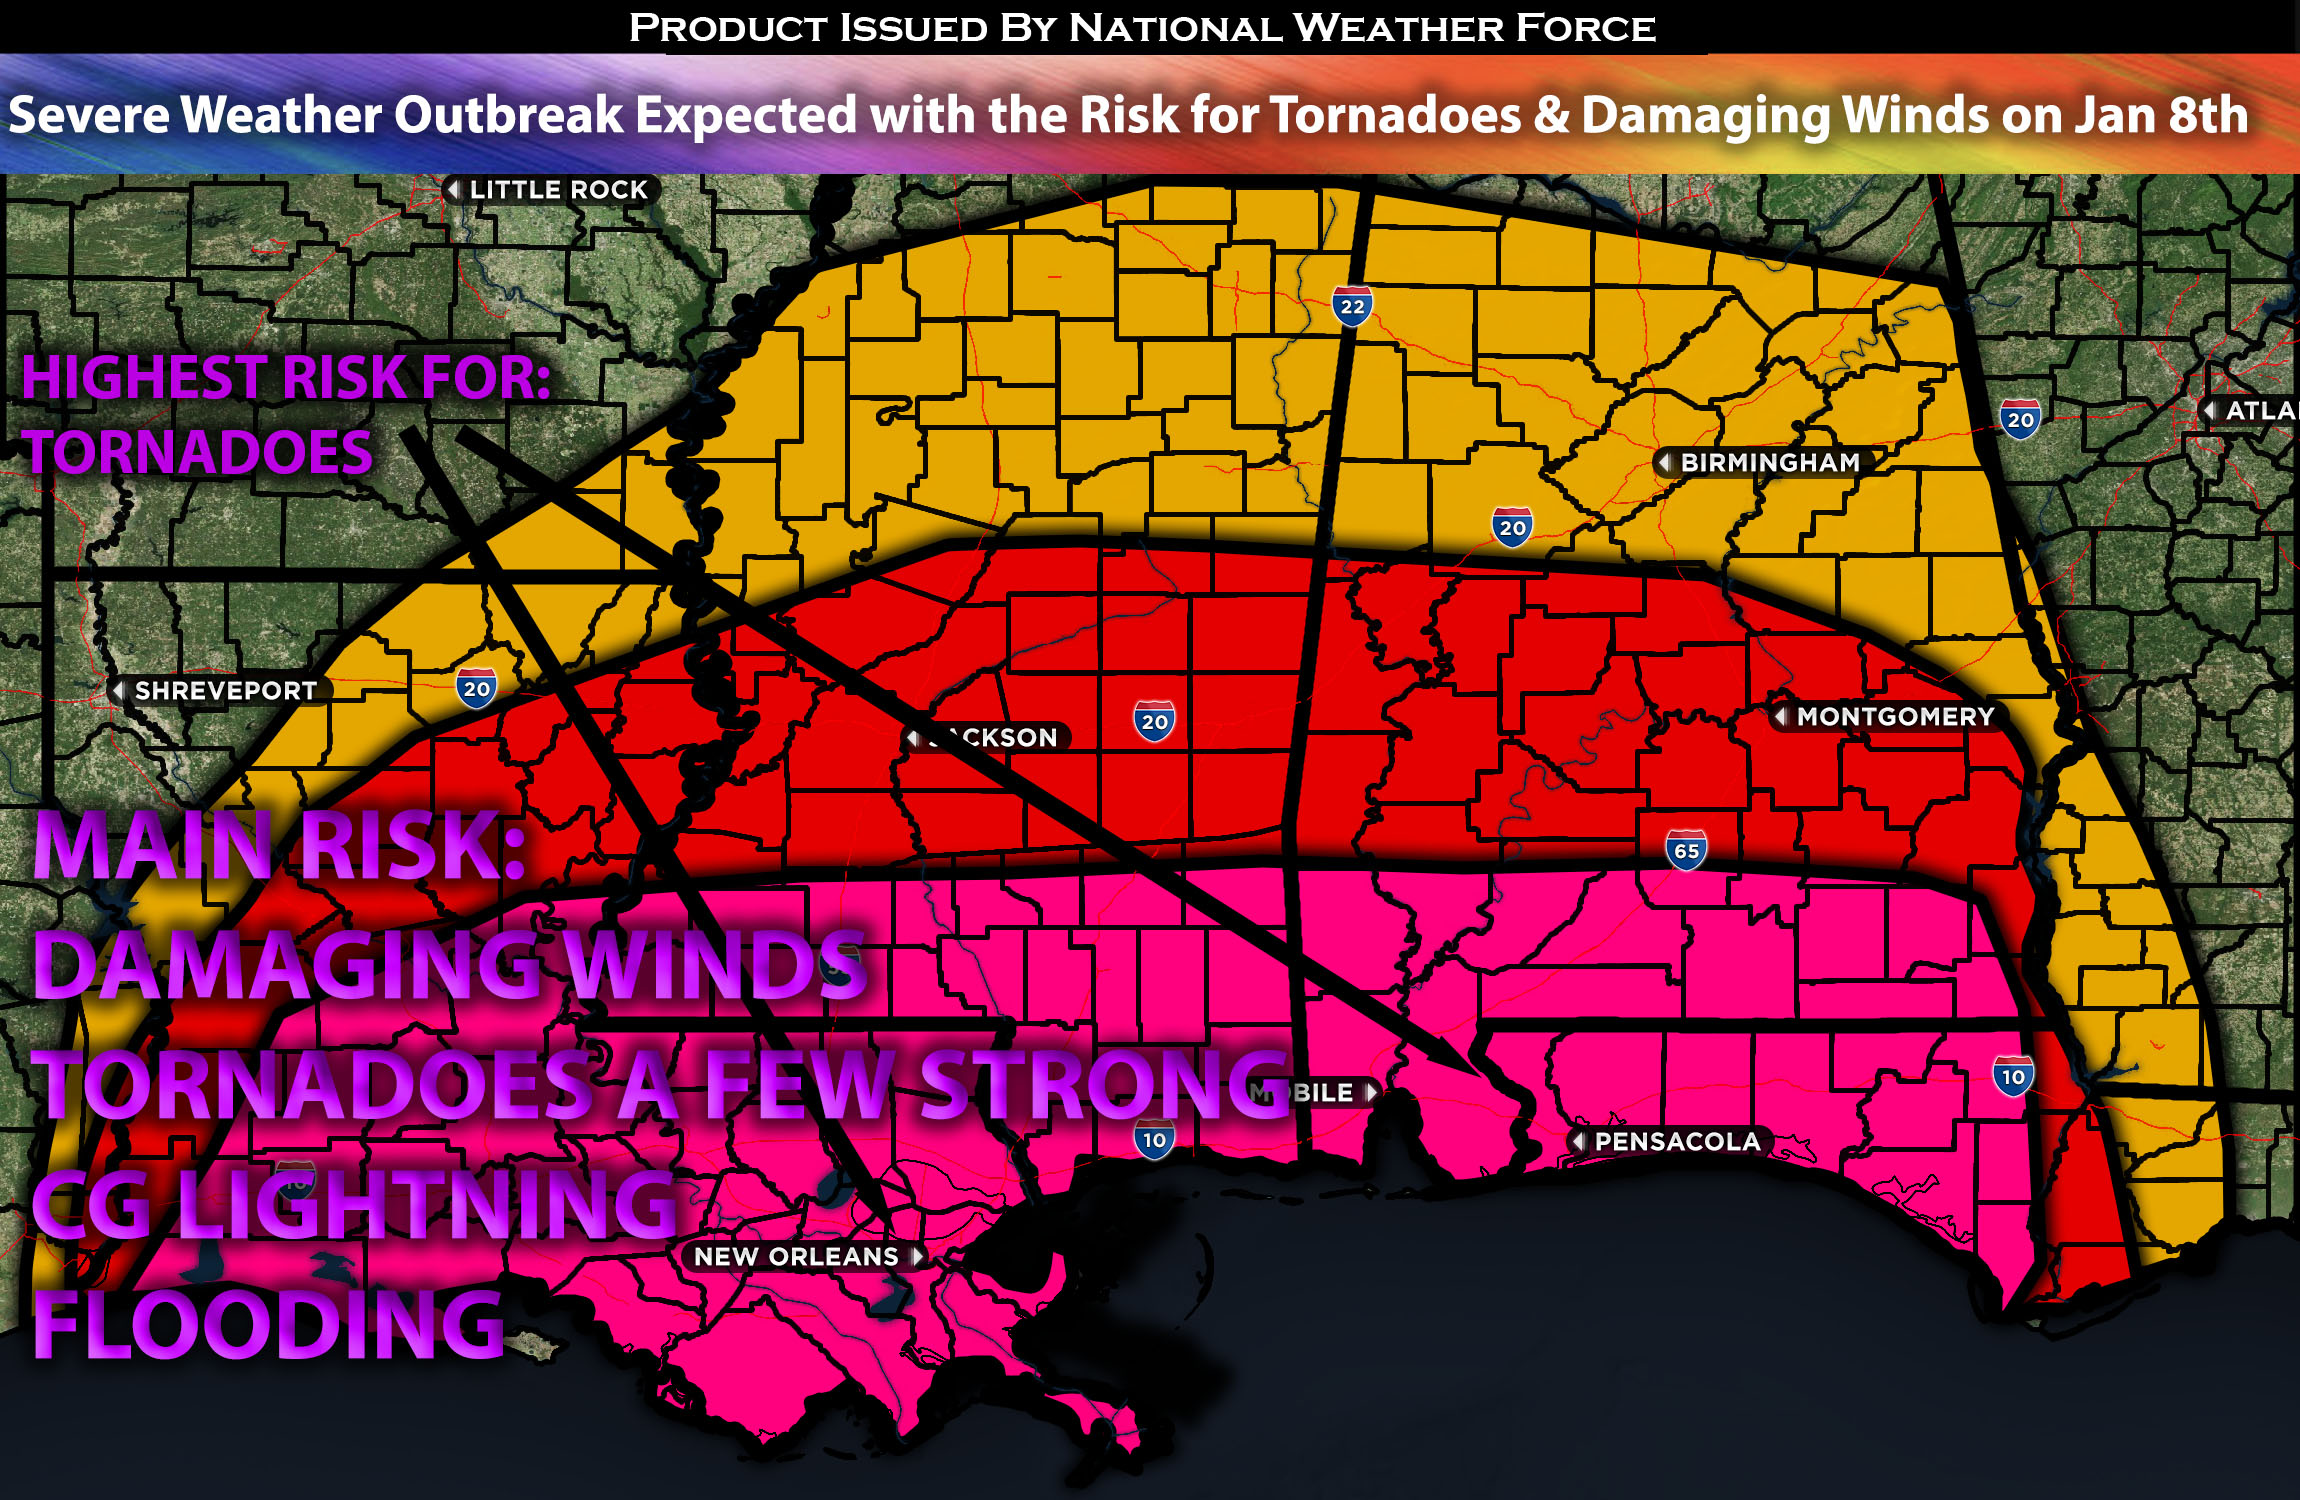 Severe Weather Outbreak Expected with the Risk for Tornadoes & Damaging